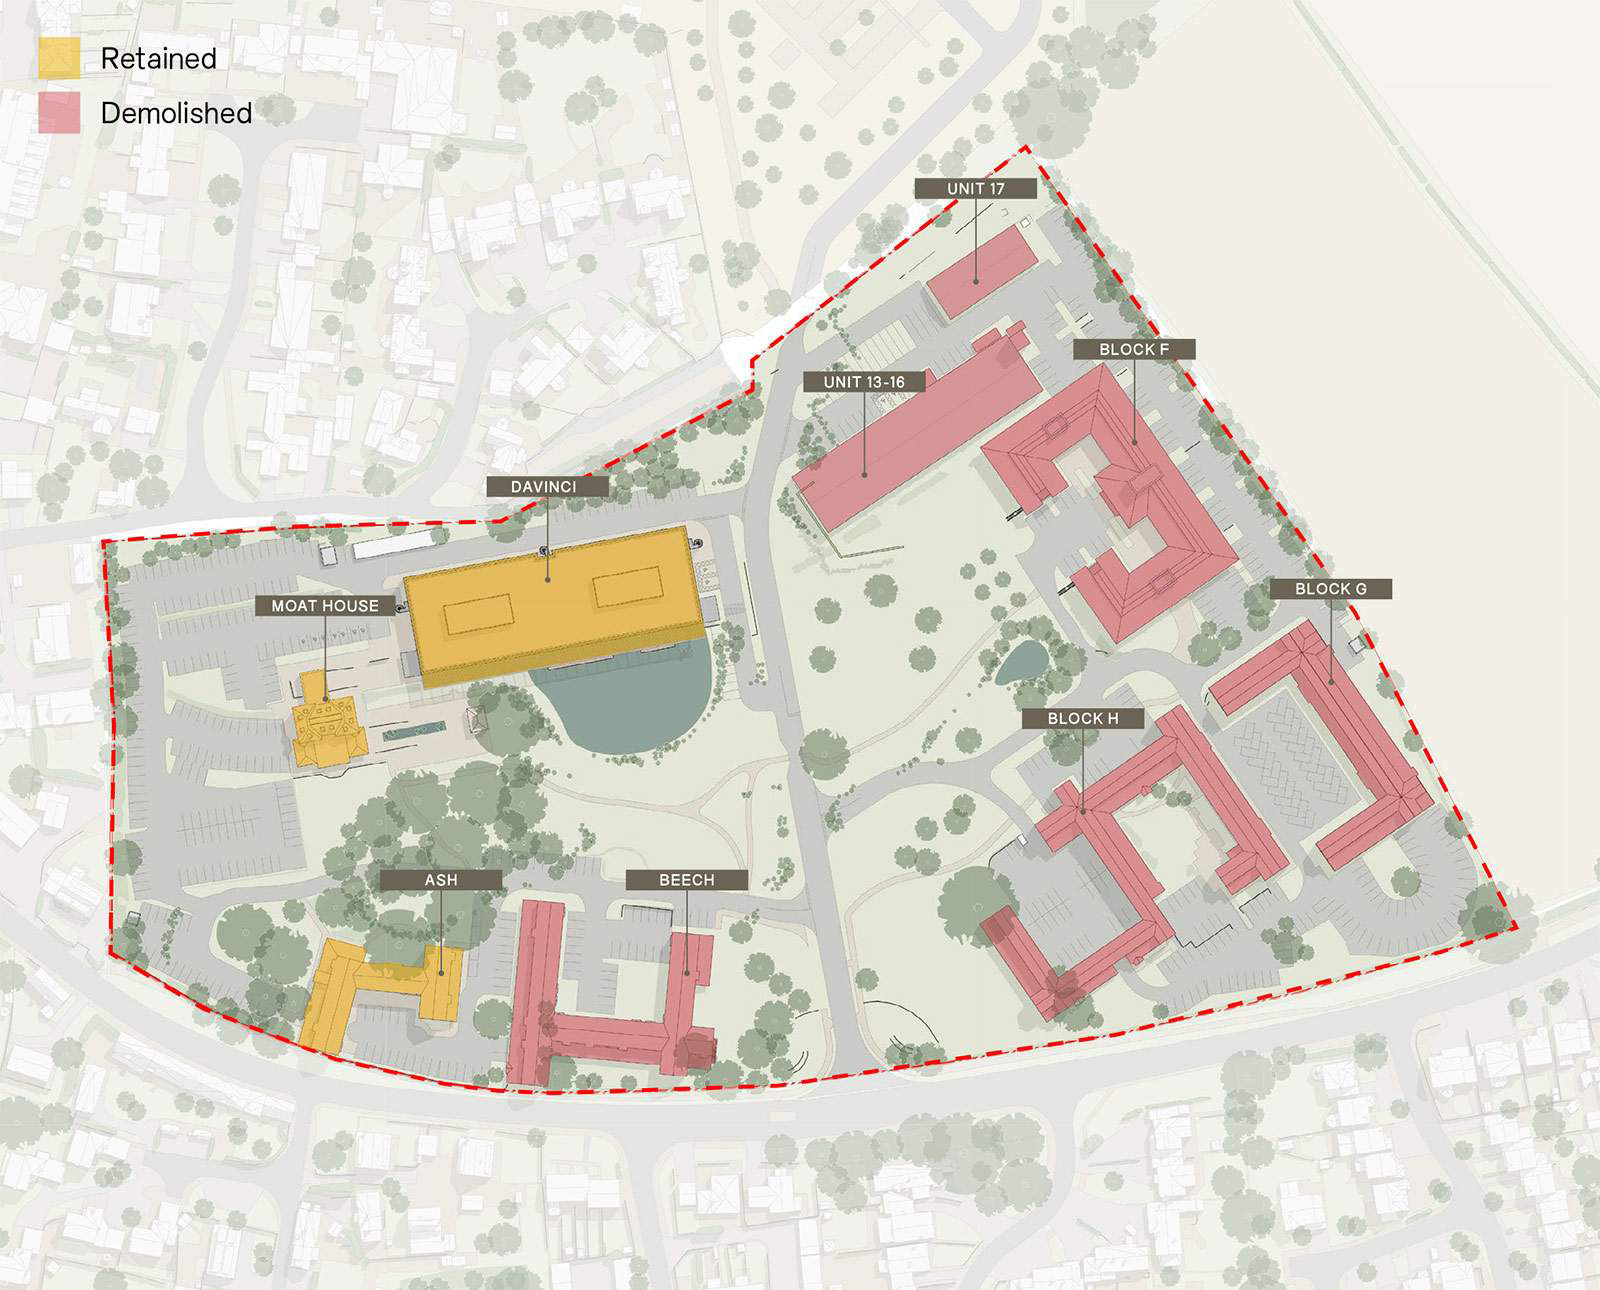 existing site plan